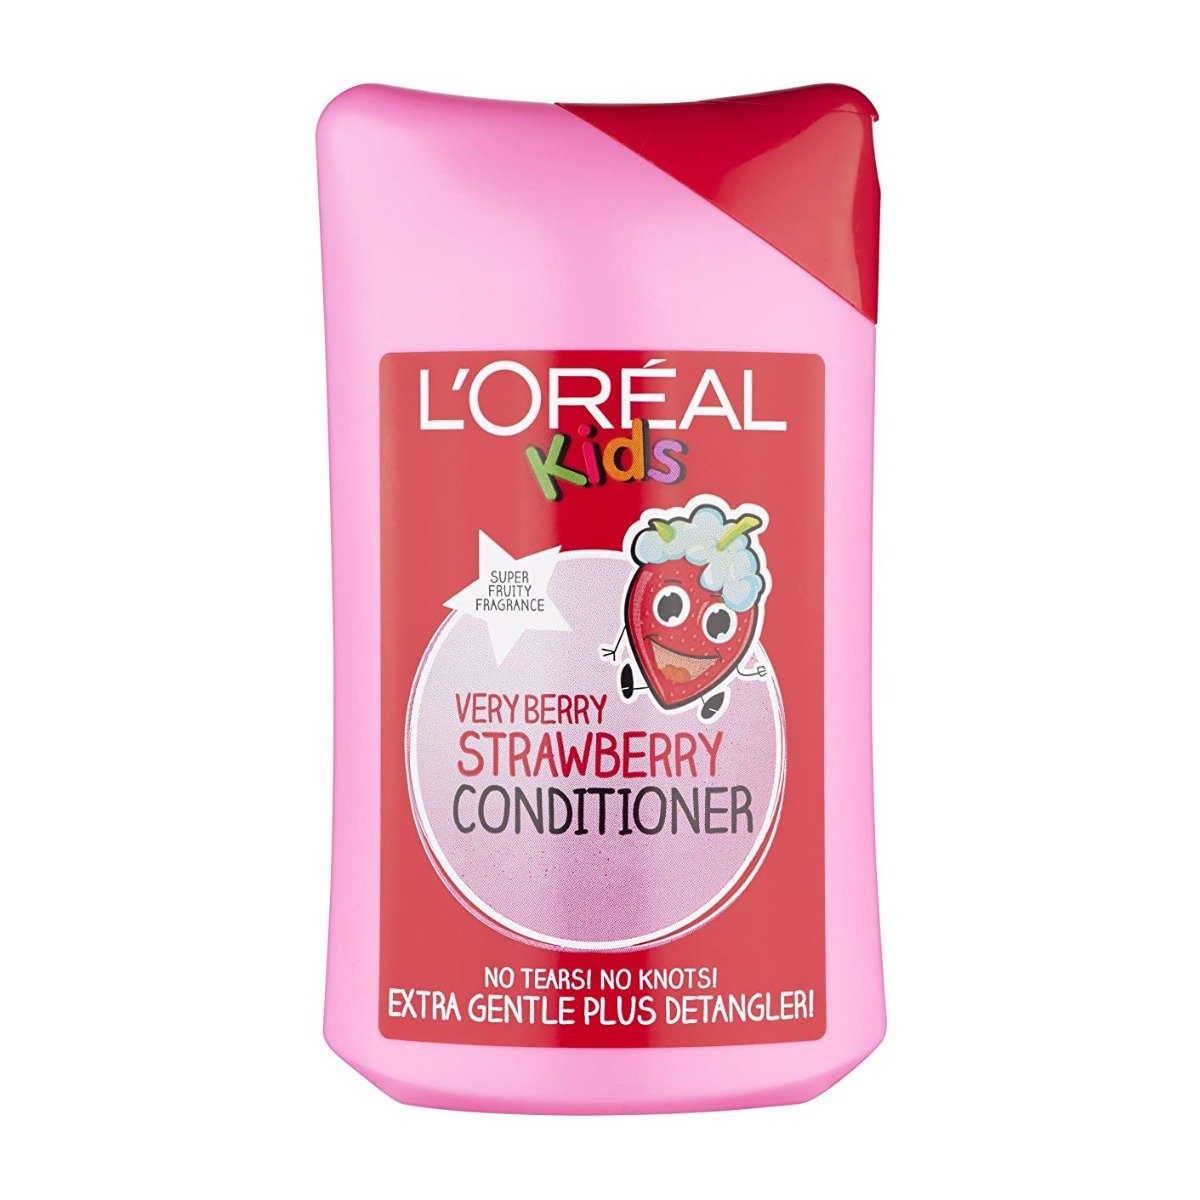 L’Oreal Kids Very Berry Strawberry Conditioner - 250ml - Bloom Pharmacy